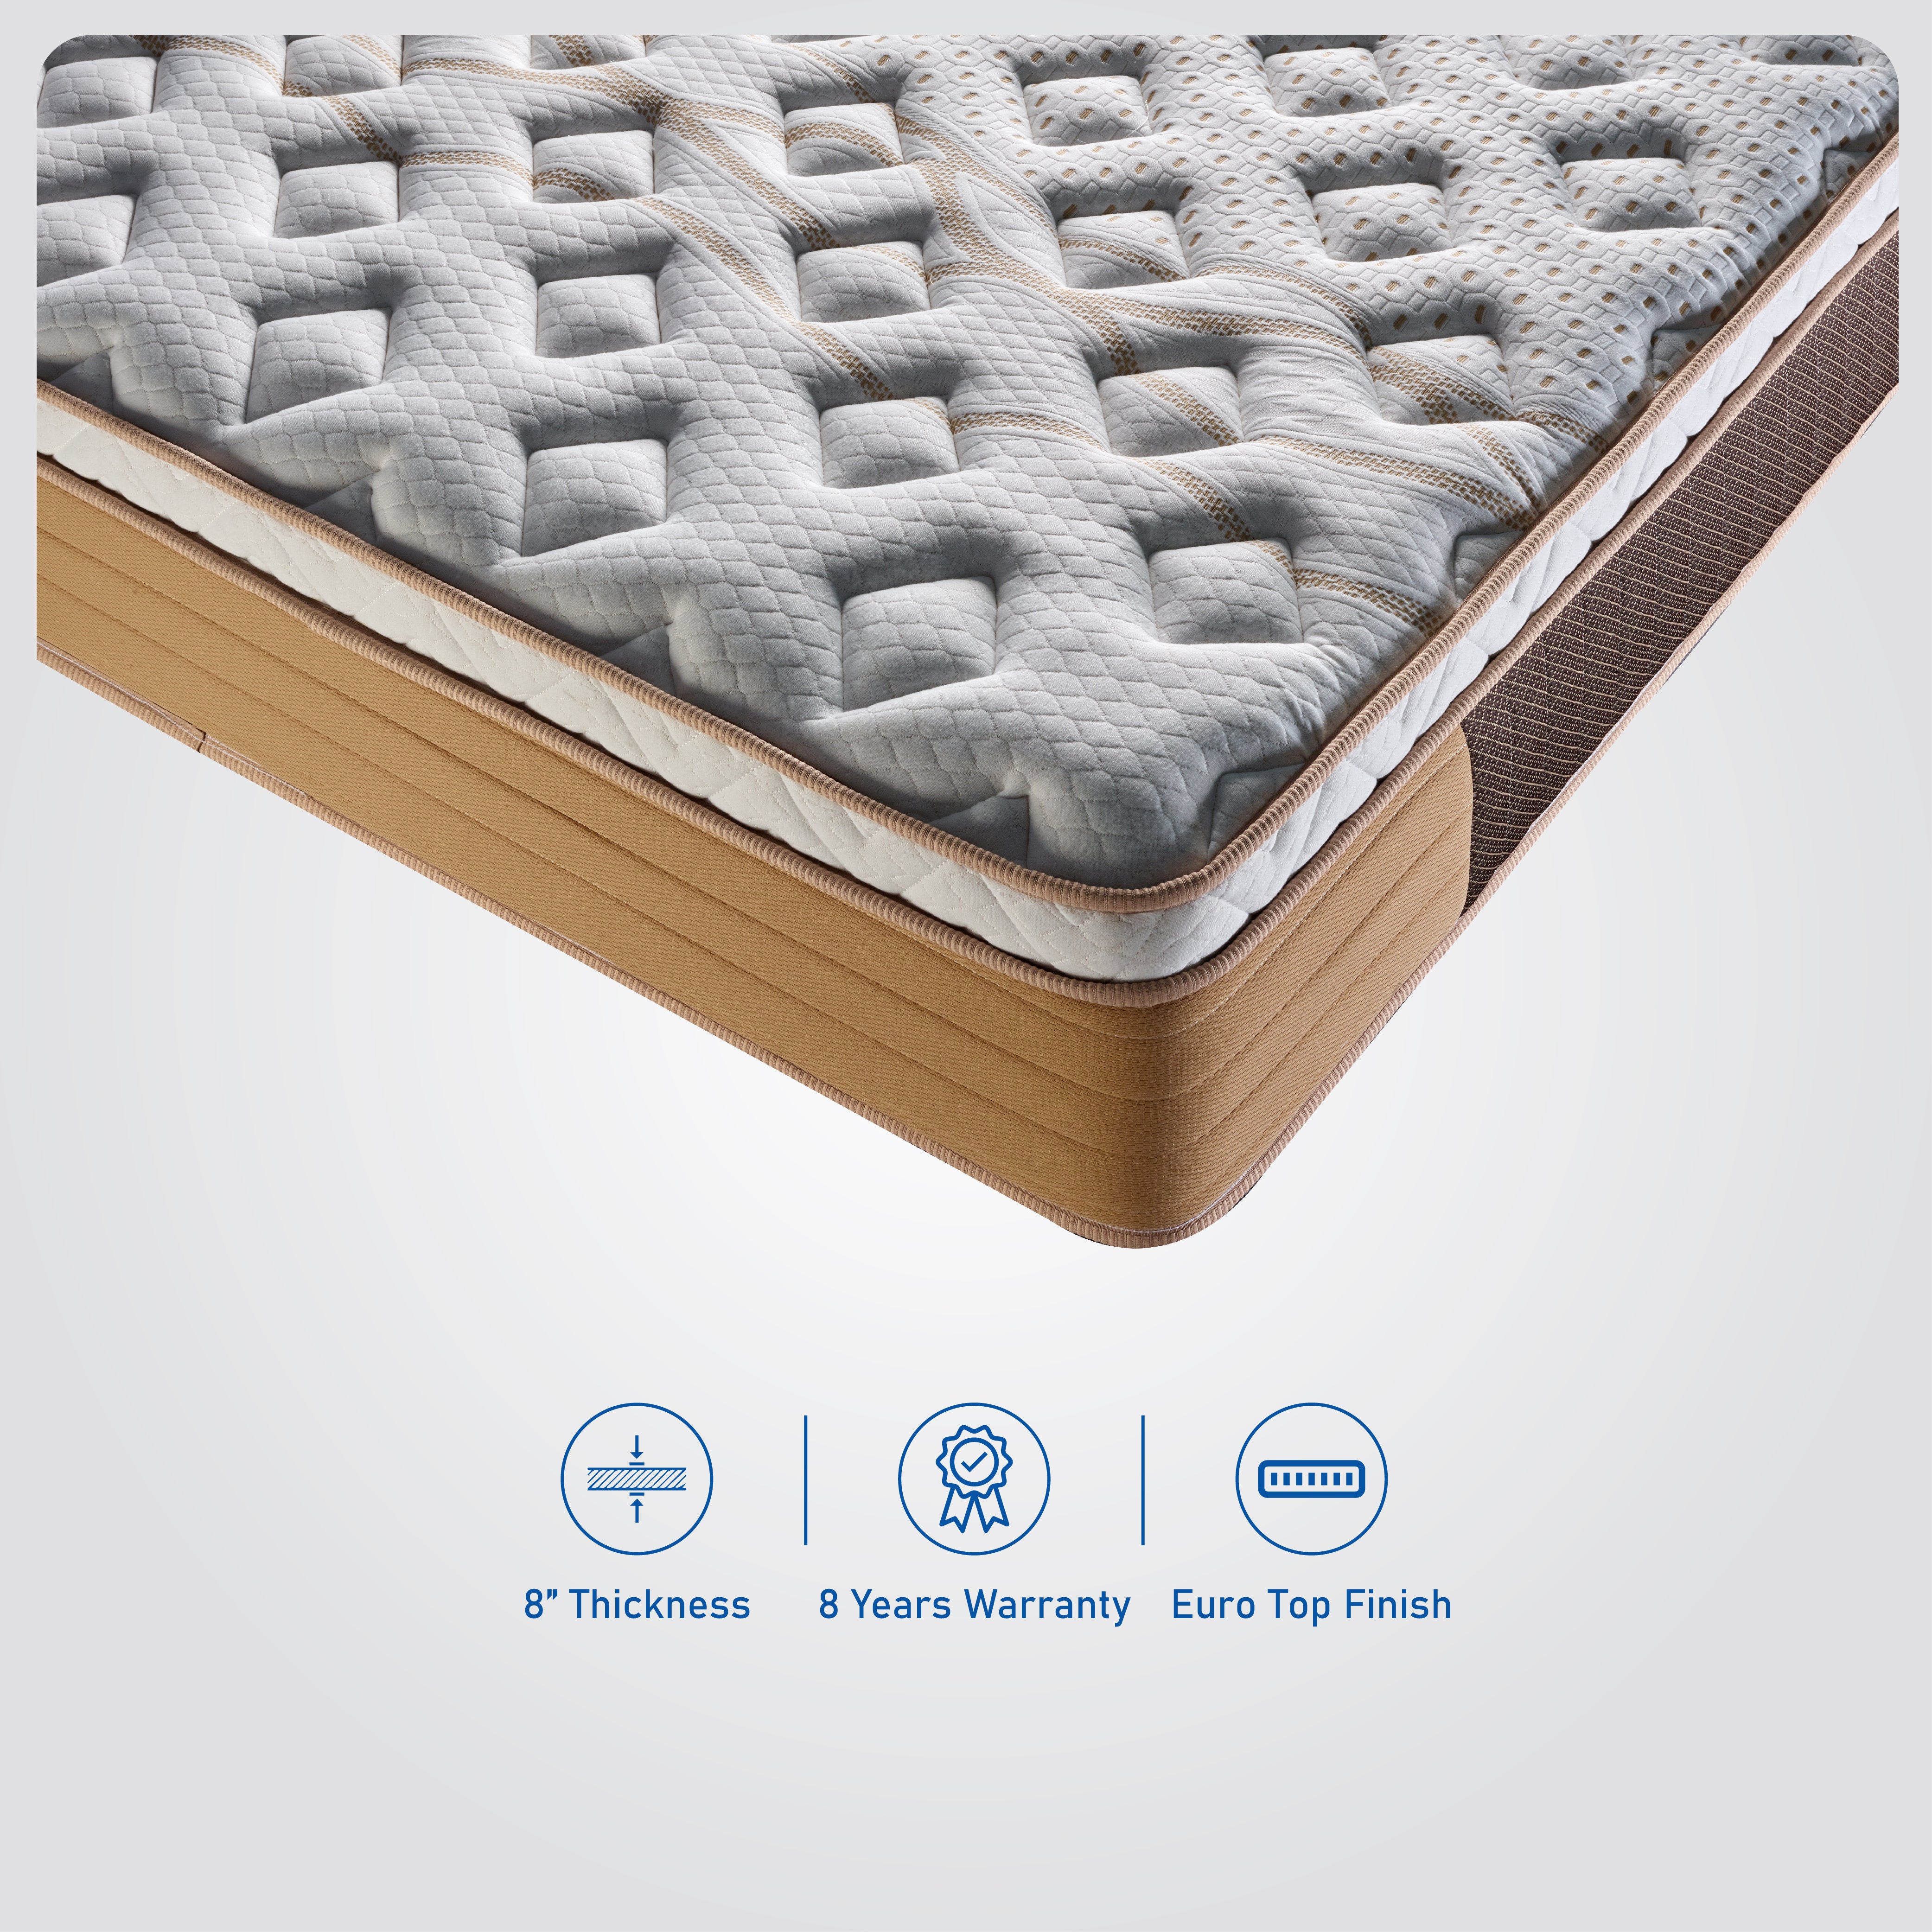 Buy Pressure Relief Bonnel Spring And Memory Foam Mattress In India